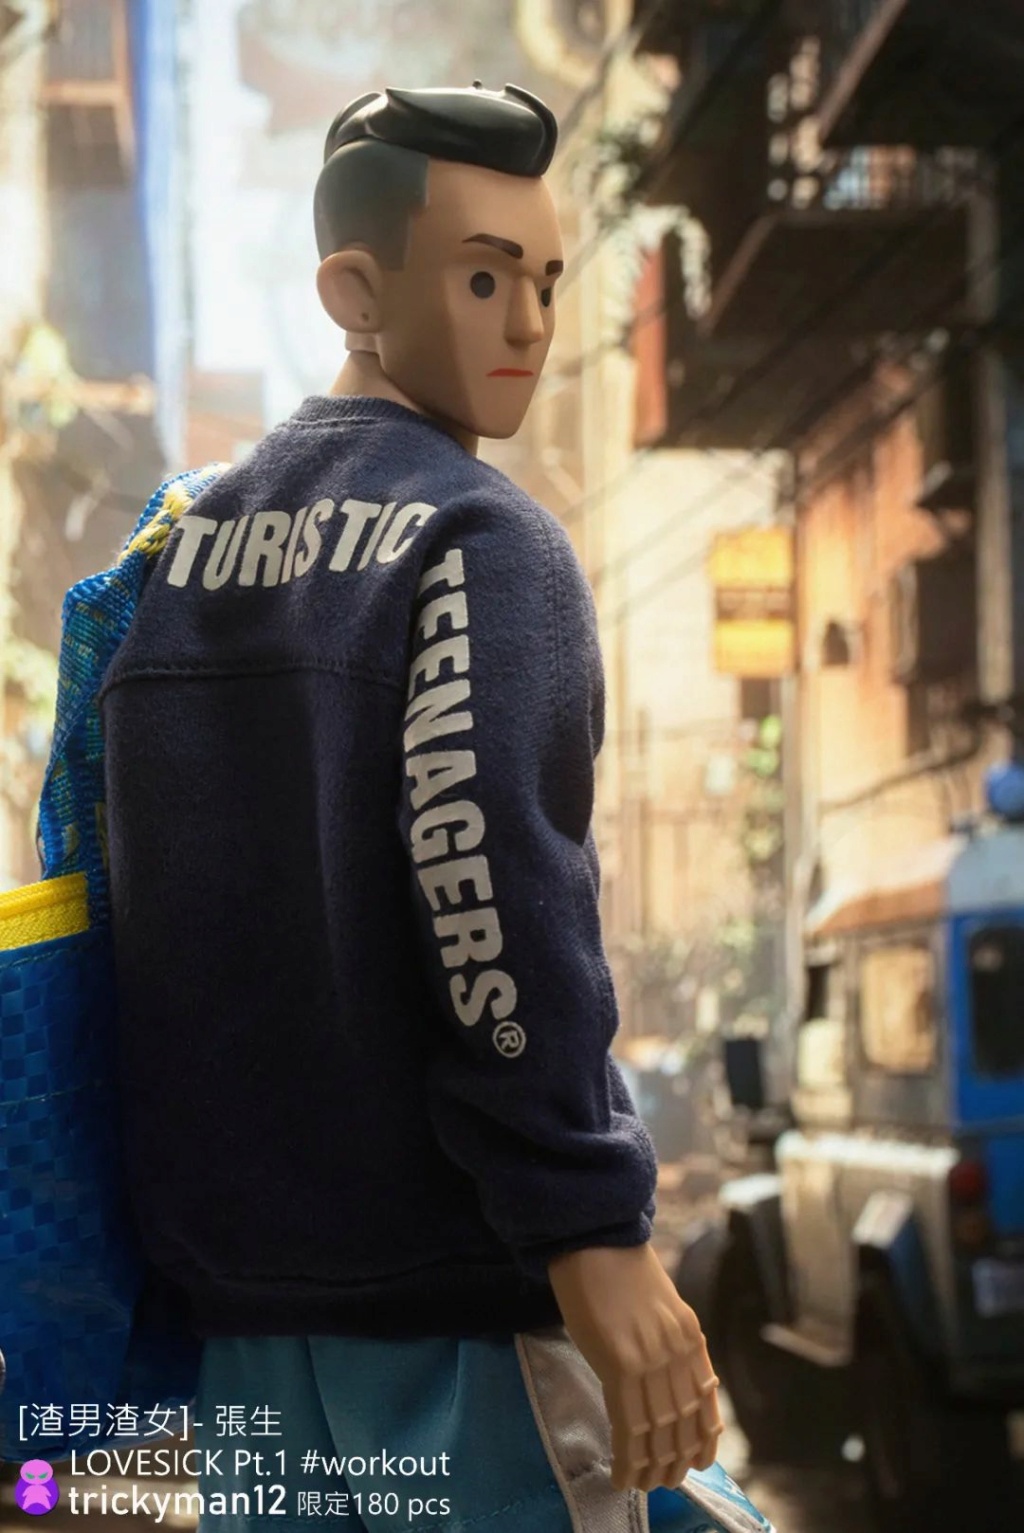 ScumbagSeries - NEW PRODUCT: Trickyman12: 1/6 "Scumbag" series - Zhang Sheng LOVESICK Pt.1 action figure 17562110